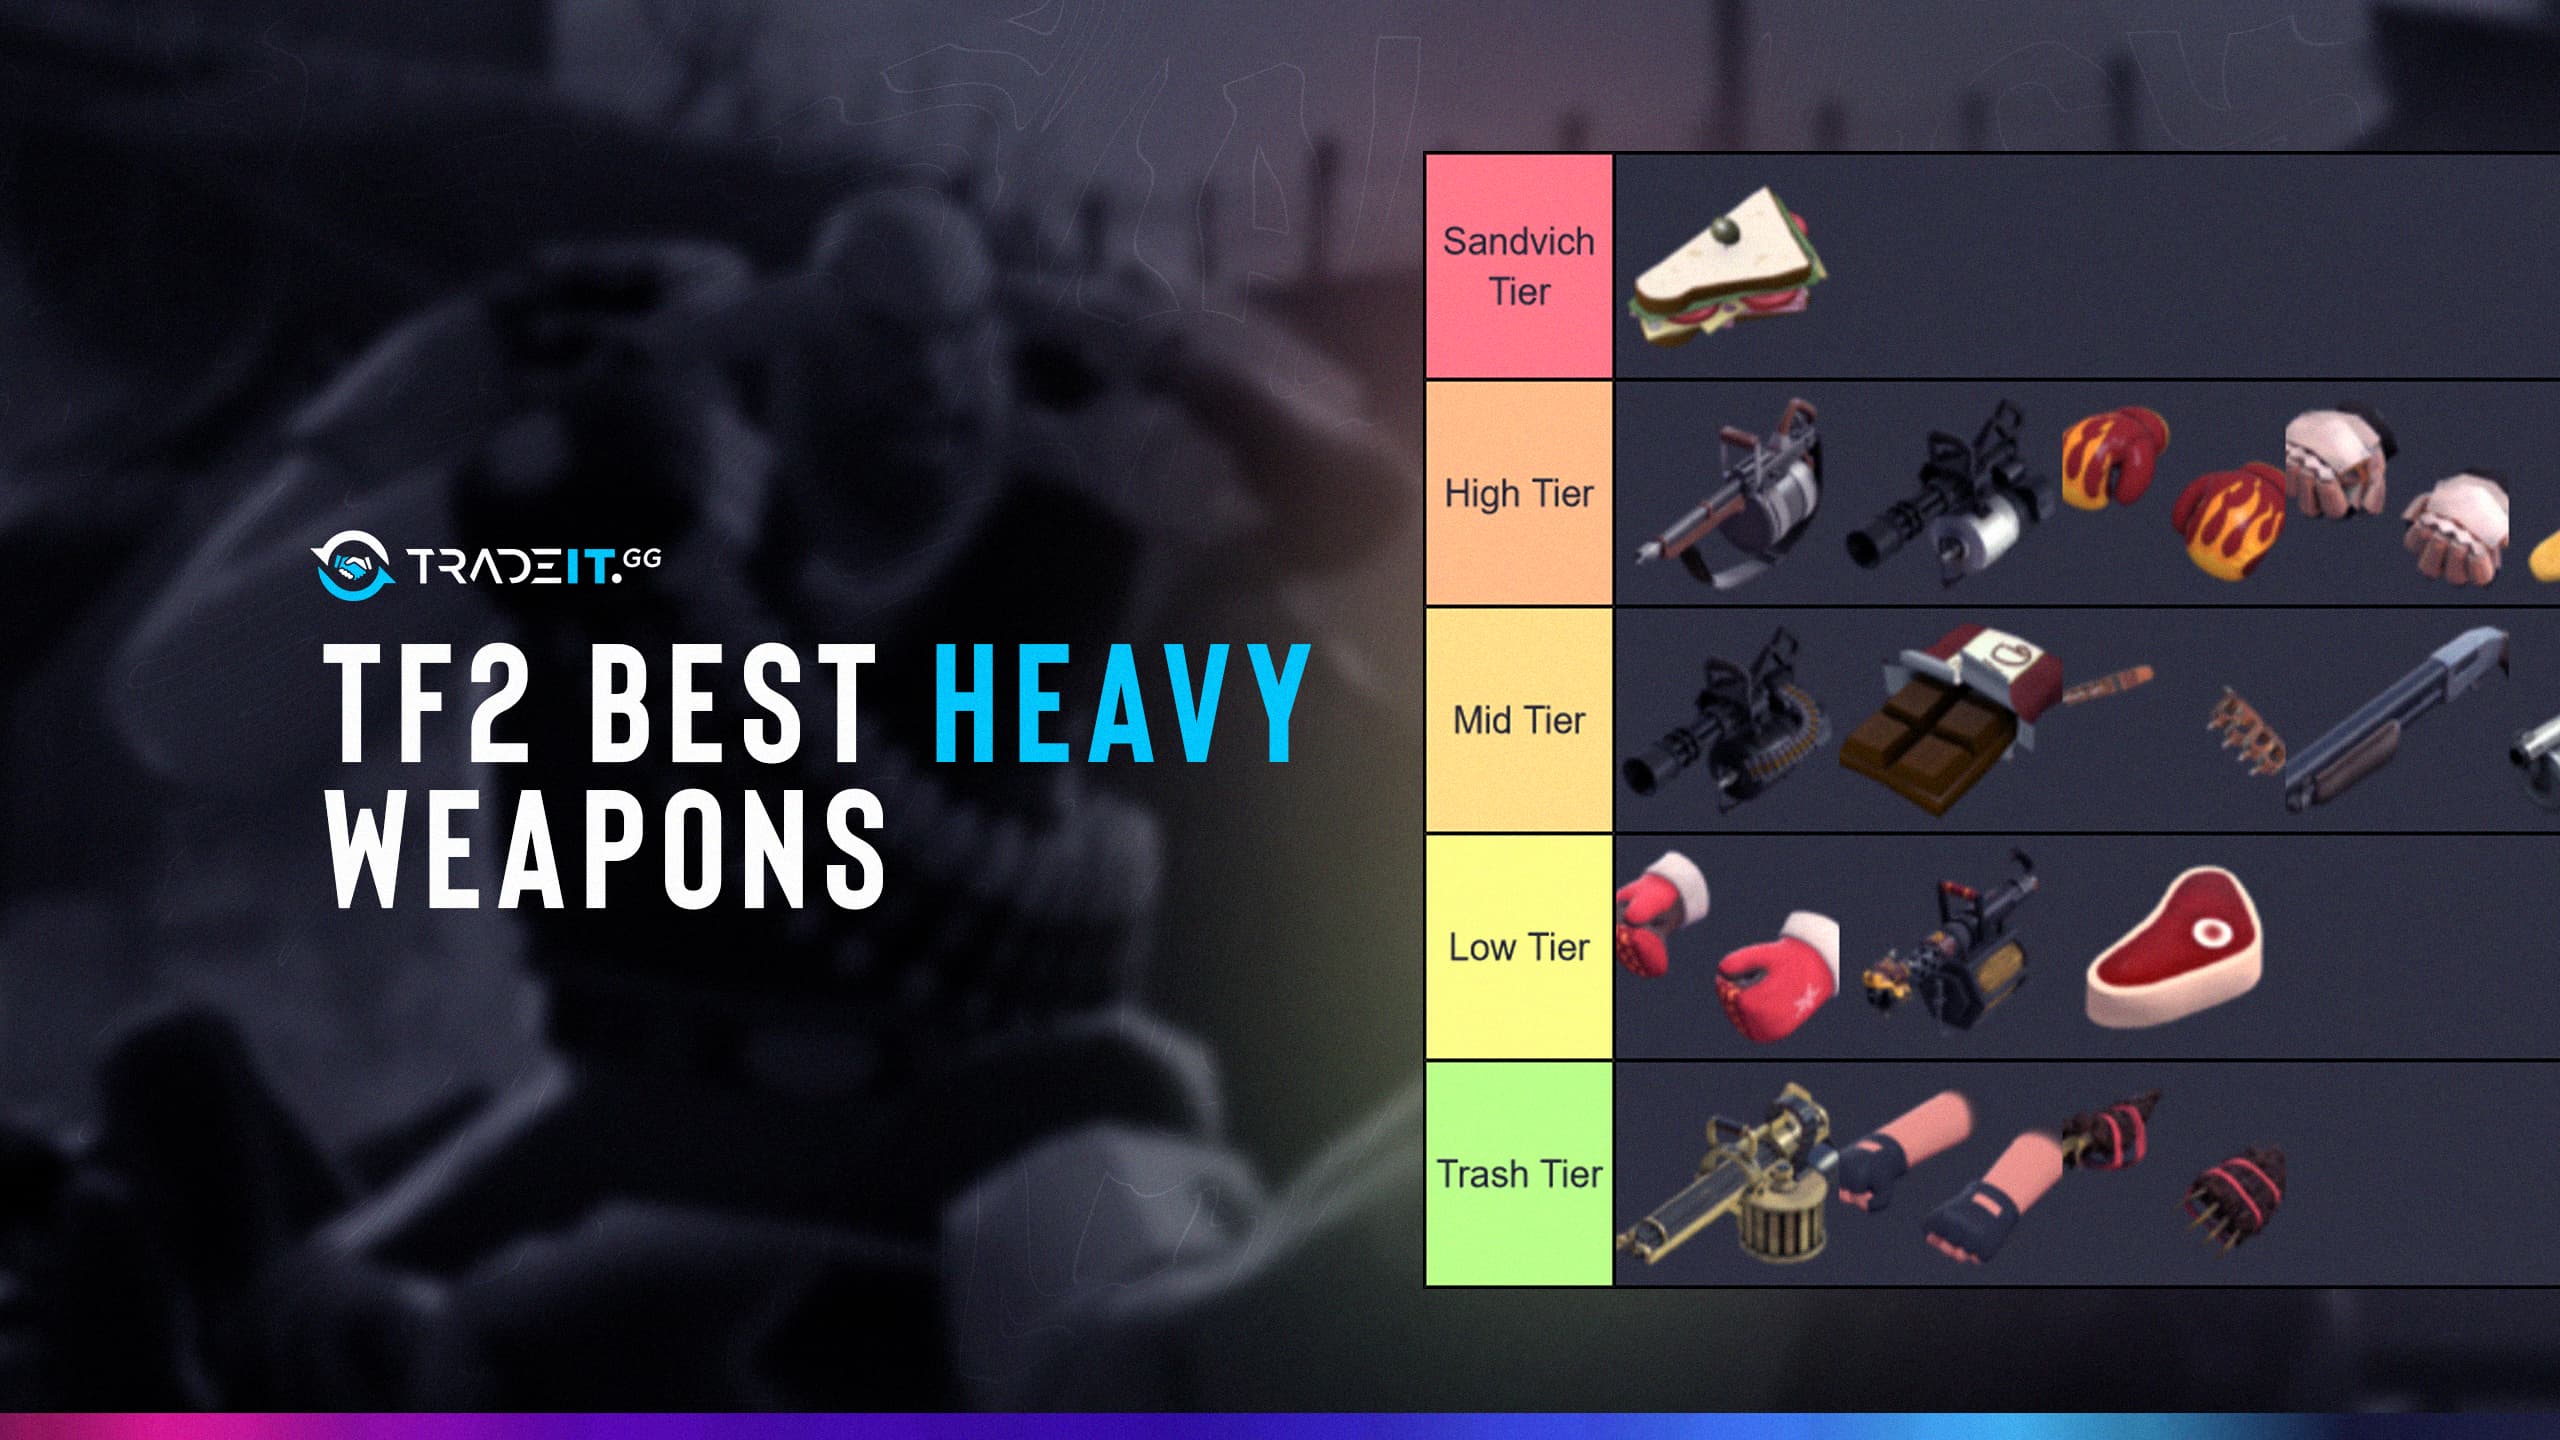 Best Heavy Weapons TF2 [TOP 10 List] - Primary, Secondary & Melee